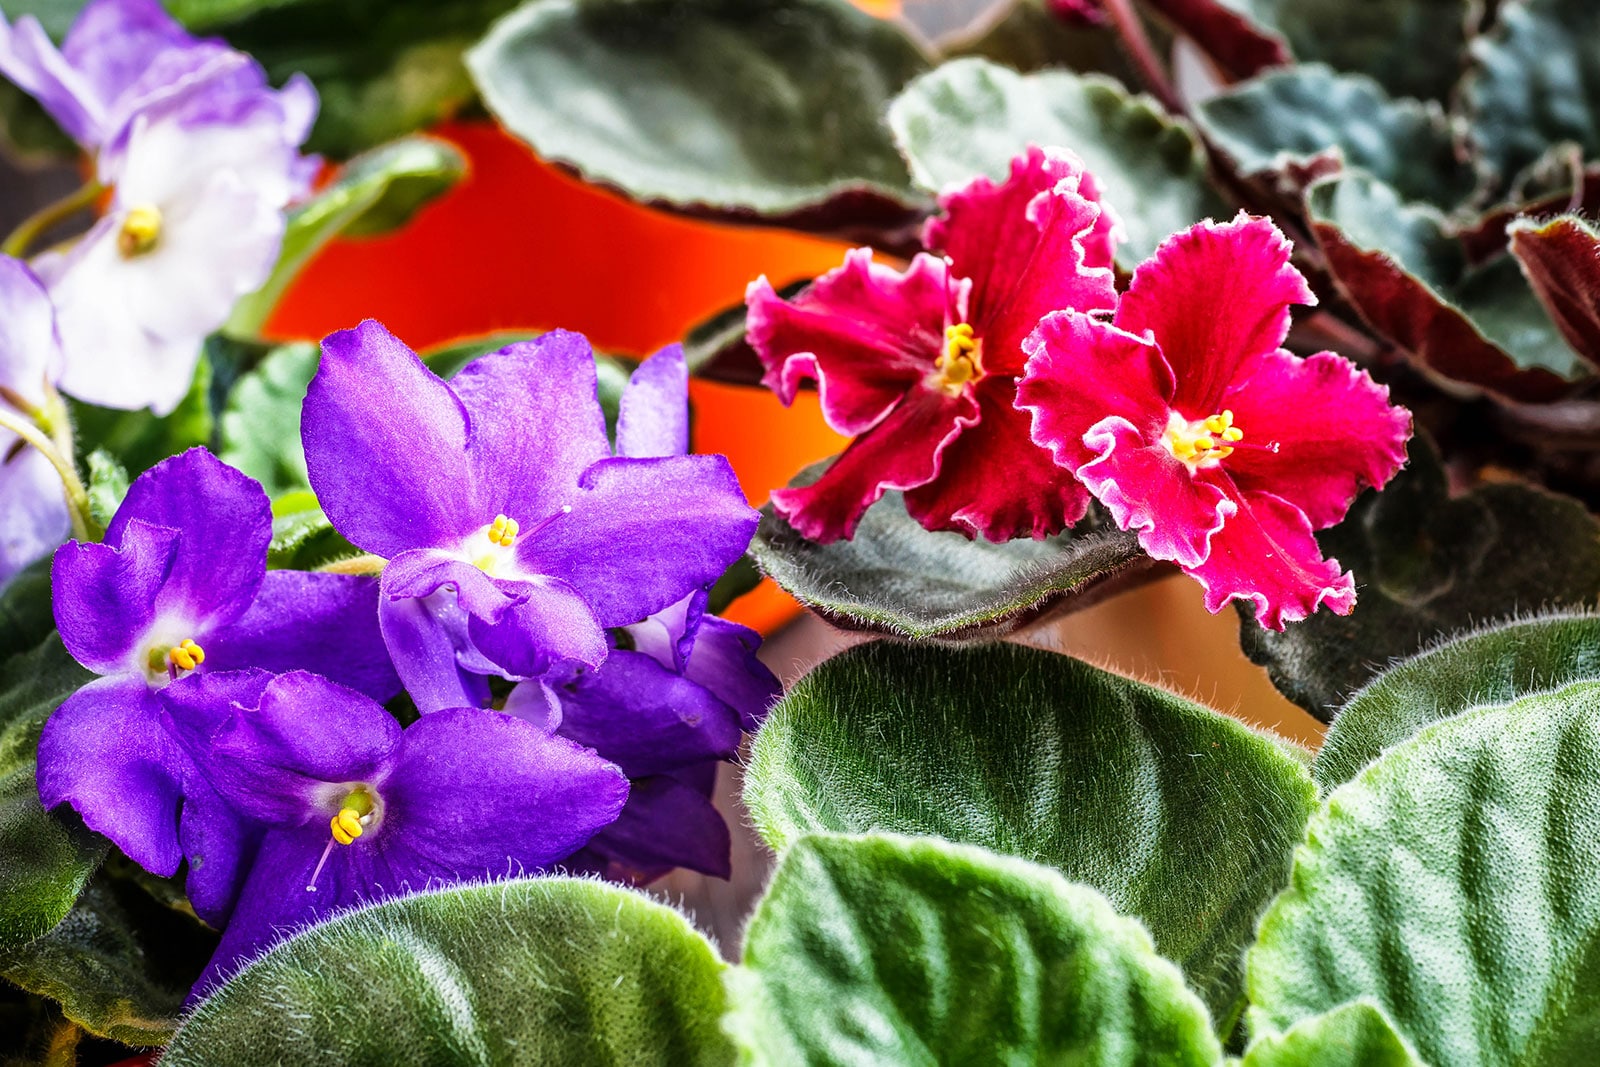 African violet with purple pansy flowers next to an African violet with frilled crimson flowers